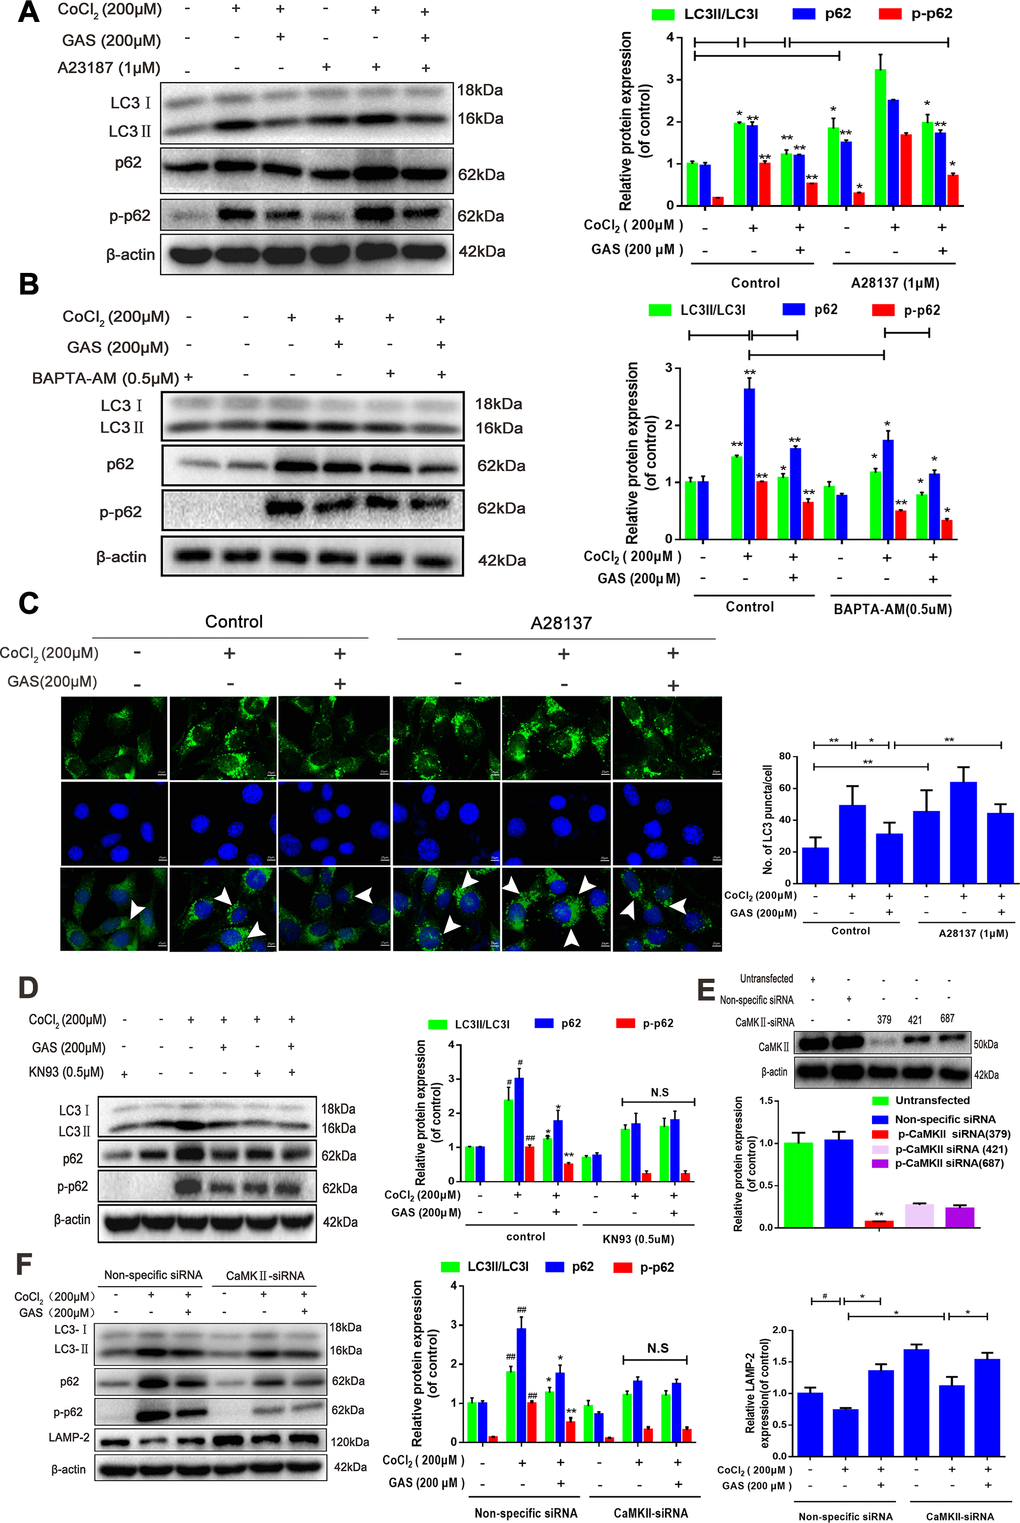 GAS alleviated the CoCl2-induced suppression of autophagic flux by inhibiting [Ca2+]i-dependent CaMKII phosphorylation in HT22 cells. (A, B) Levels of LC3, p62, and phosphorylated p62 (Ser349) in HT22 cells treated with calcium chelator (BAPT-AM) or calcium ionophore (A23187) were assessed with or without GAS treatment (200 μM) for 24 h (n = 3). (C) Immunofluorescence analysis revealing modulation of LC3 in HT22 cells treated with calcium ionophore (A23187), with or without GAS (200 μM) for 24 h (n = 3). Autophagosomes were visualized (green puncta) by using a Leica DMIRB at 800× magnification. In each independent experiment, 5 visual field cells were randomly selected and quantified and expressed as mean ± standard error of the mean (SEM). (D) Levels of LC3, LAMP-2, p62, and phosphorylated p62 (Ser349) in HT22 cells treated with KN93 were assessed with or without GAS treatment (200 μM) for 24 h (n = 3). (E) Detection of CAMKII-siRNA transfection efficiency by western blotting. (F) Levels of LC3, LAMP2, p62, and phosphorylated p62 (Ser349) in HT22 cells transfected with nonspecific siRNA or CaMK II-siRNA were evaluated with or without GAS treatment (200 μM) for 24 h (n = 3). The experimental results were normalized to β-actin levels and are shown as fold changes relative to control cells.